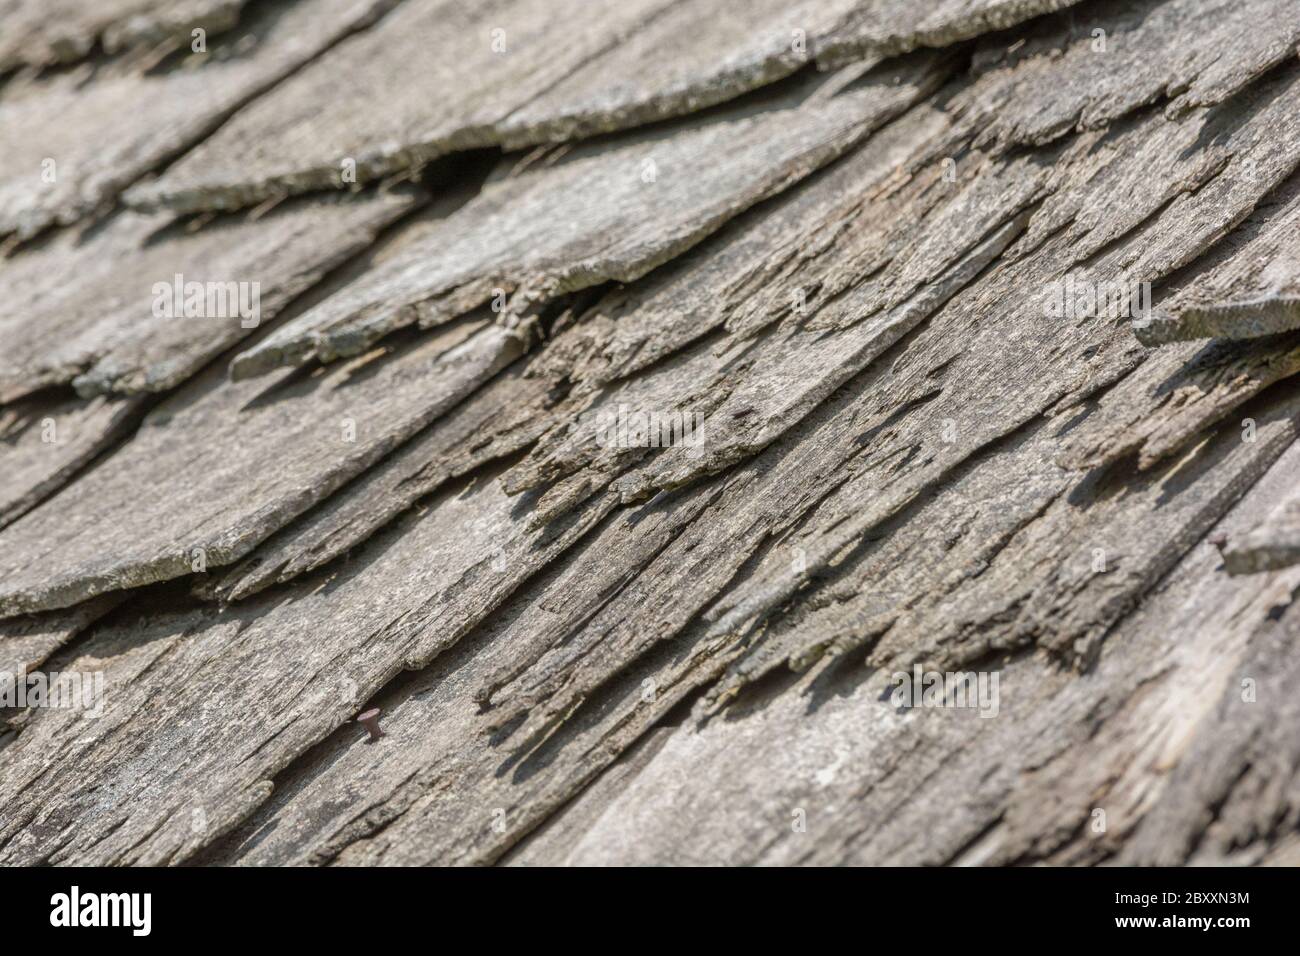 Wind and rain damaged old wood shingle / wood shake roof in poor repair, & needs replacing. Metaphor mental illness, flaky person, got a loose slate. Stock Photo